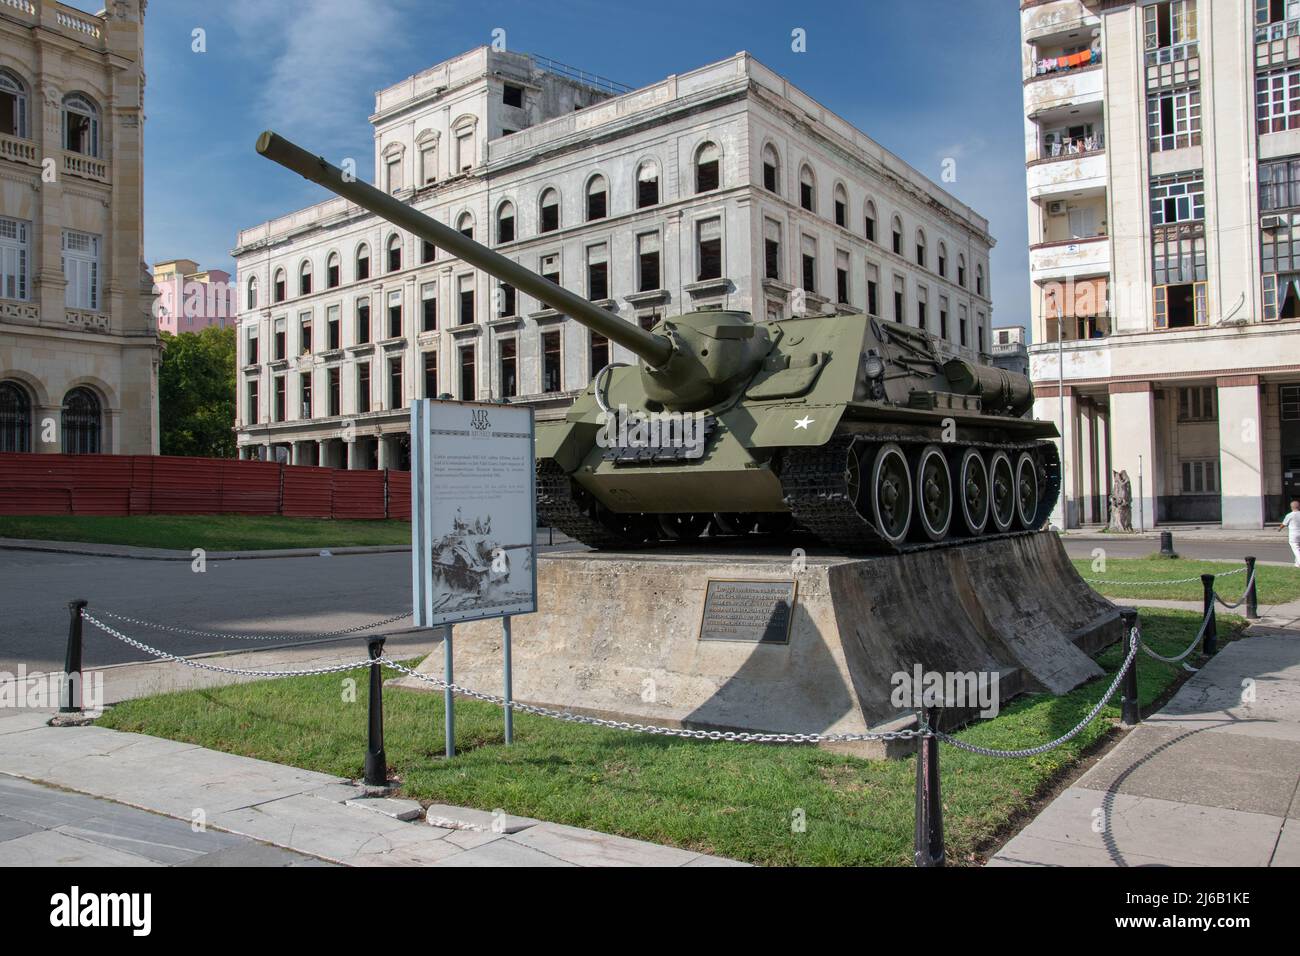 SU-100 Soviet tank destroyer used by Fidel Castro to shoot USS Houston during the Bay of Pigs Invasion in 1961, outside of the Museum of the Revolutio Stock Photo